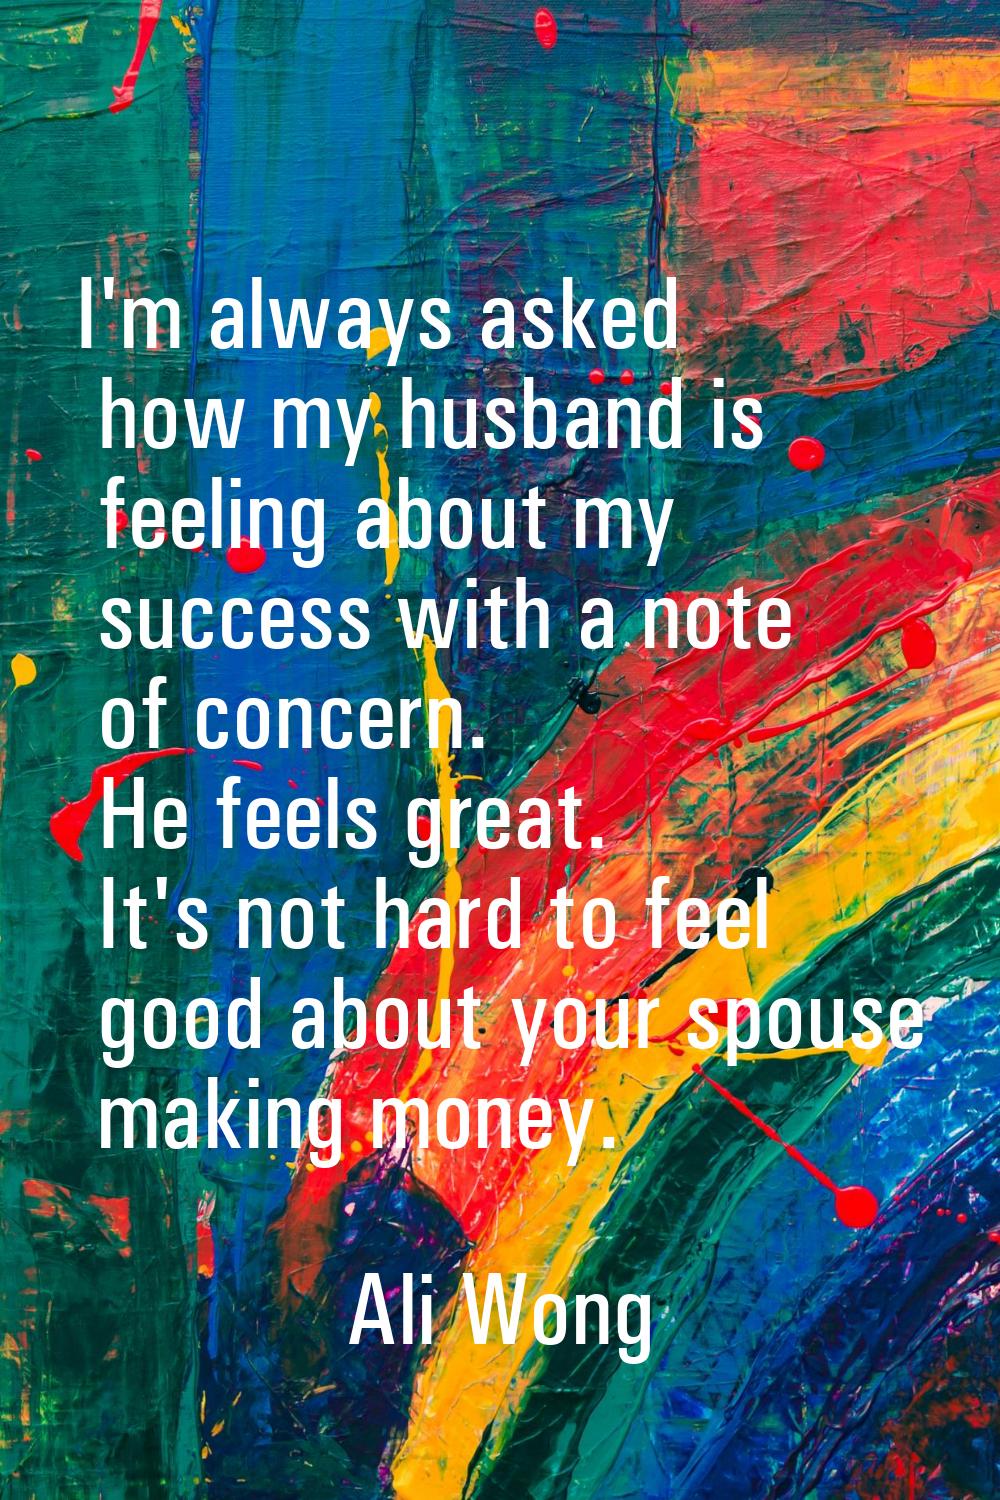 I'm always asked how my husband is feeling about my success with a note of concern. He feels great.